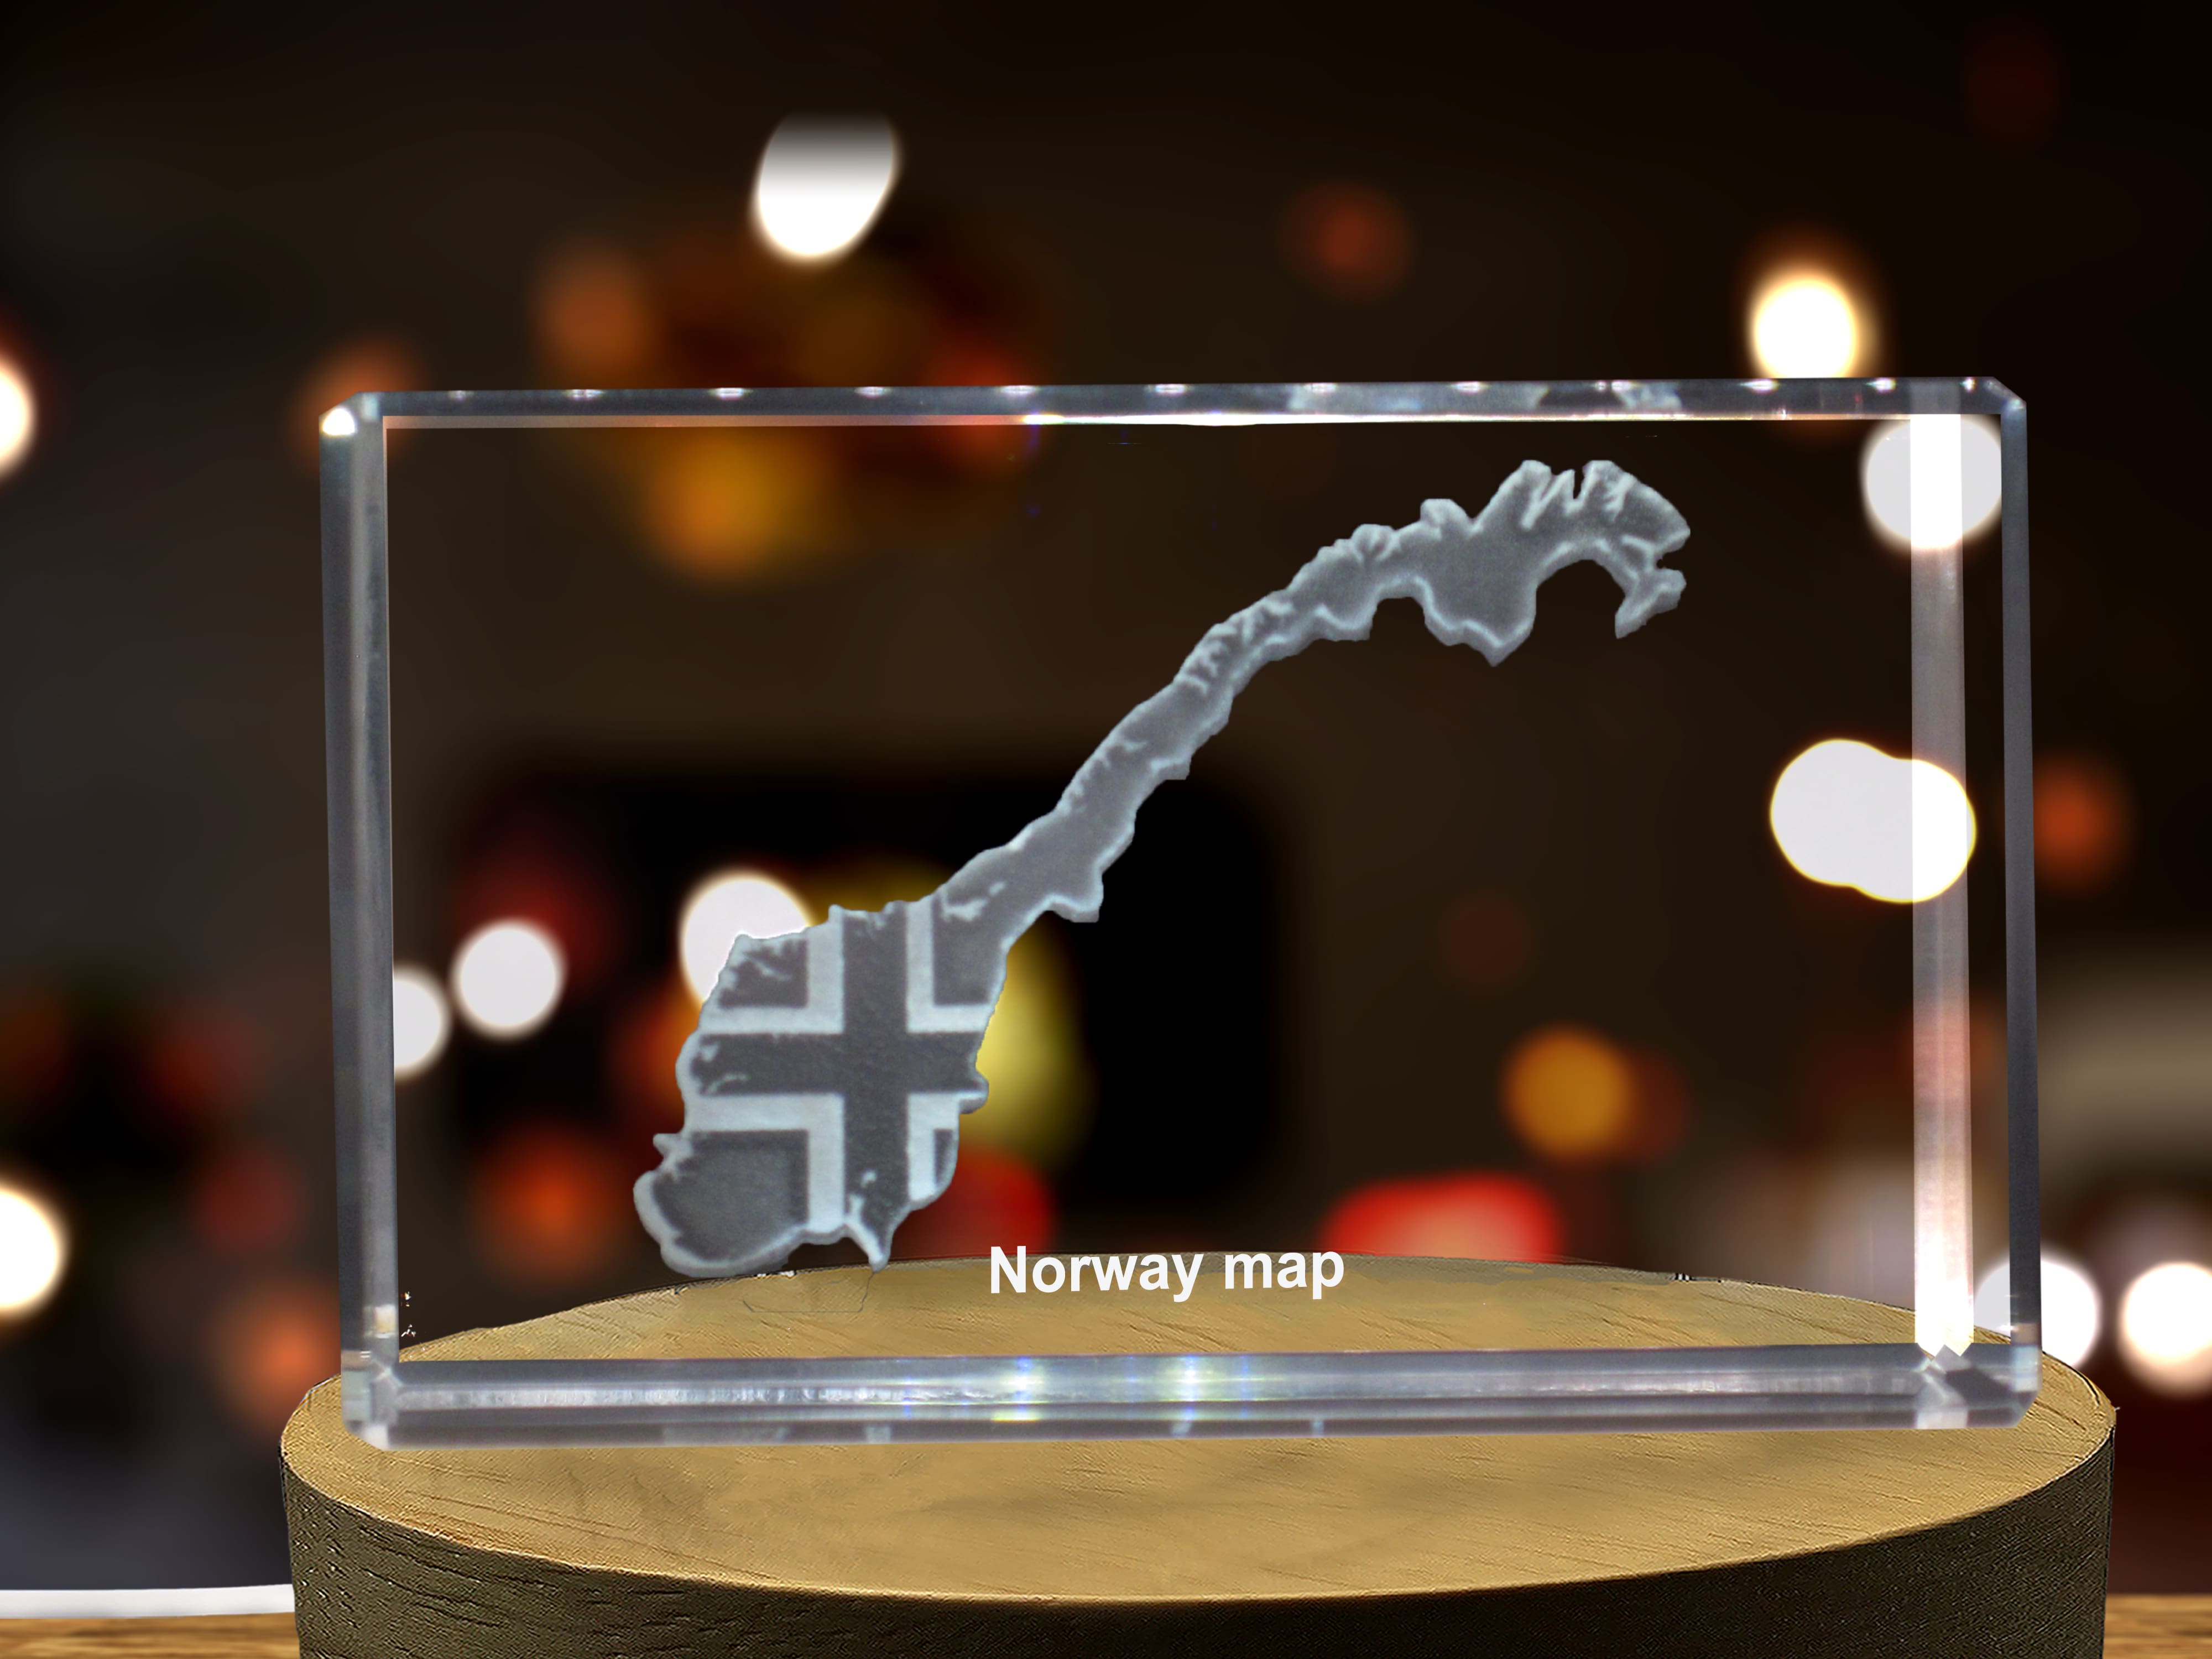 Norway 3D Engraved Crystal 3D Engraved Crystal Keepsake/Gift/Decor/Collectible/Souvenir A&B Crystal Collection